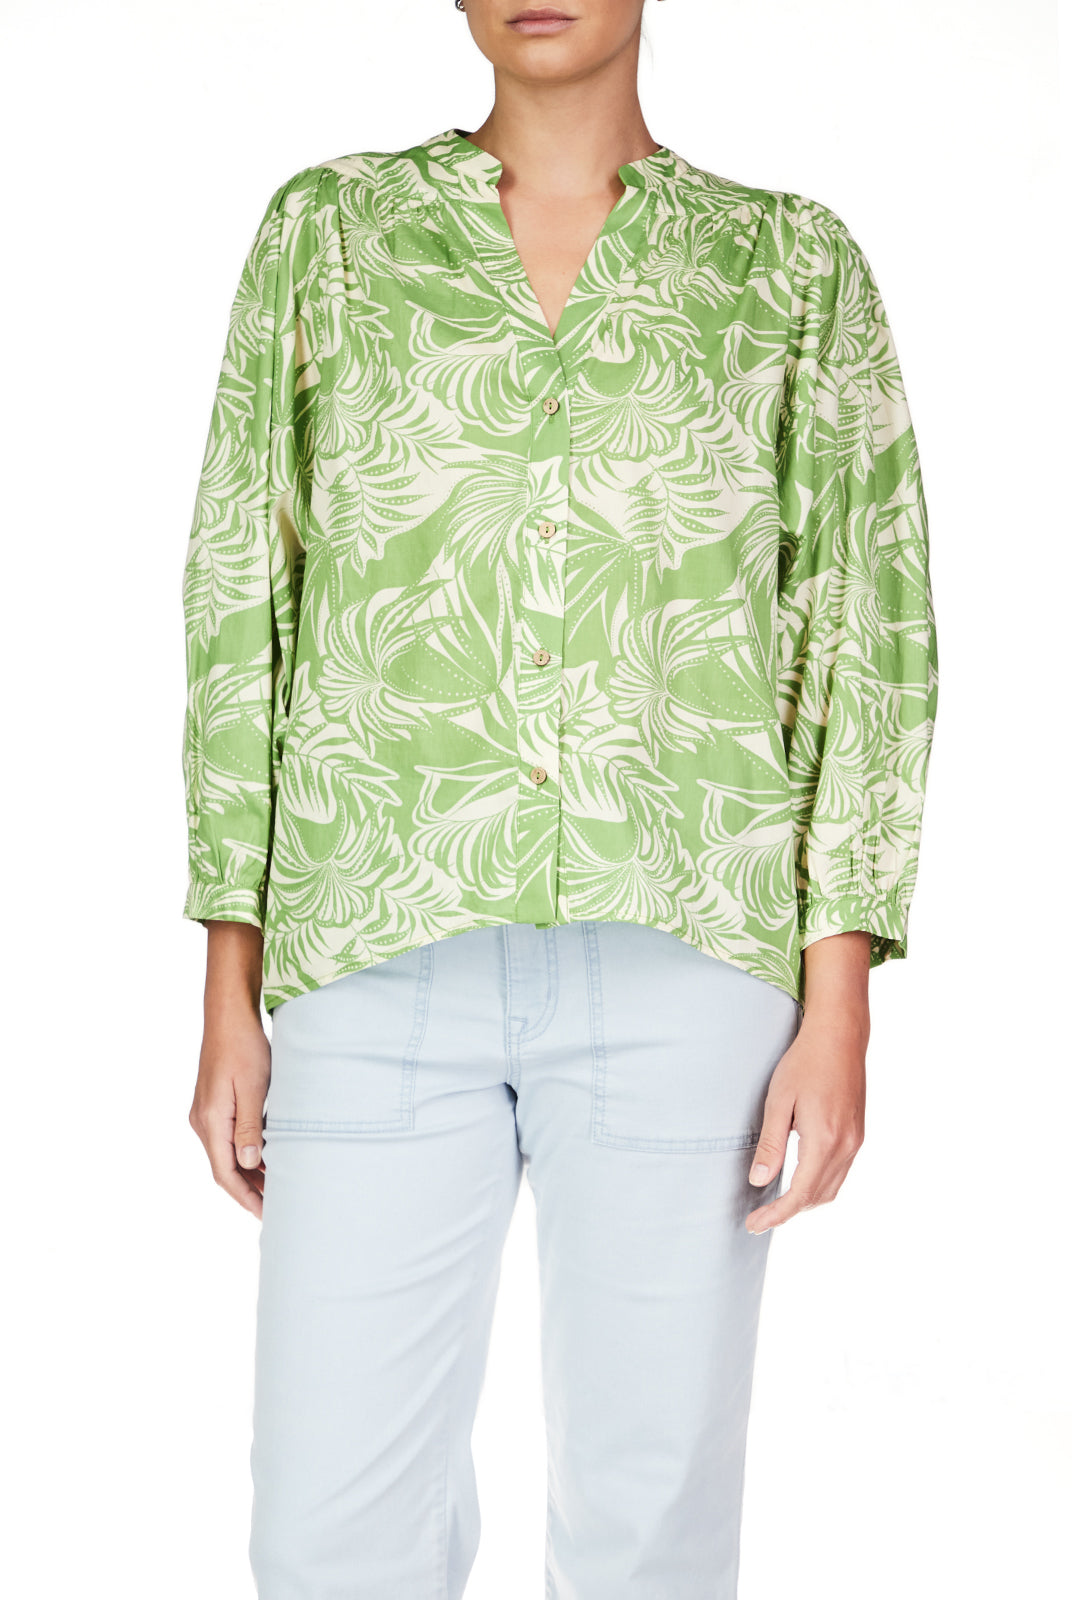 Green Flowy Top Apex Ethical Boutique